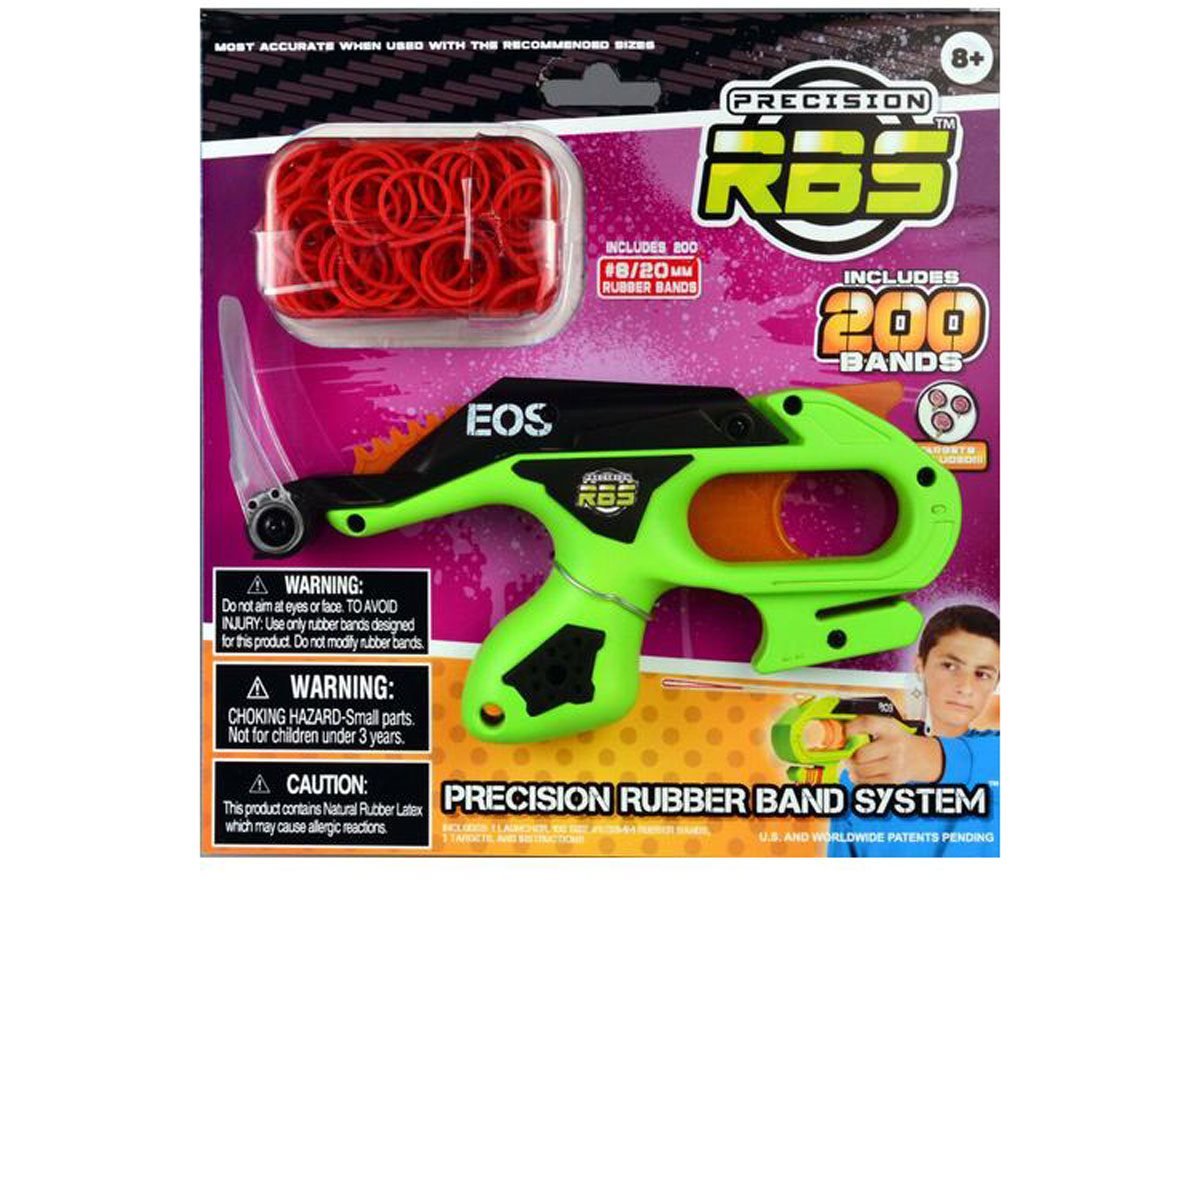 New Precision Rubber Band System EOS Rubber Band Launcher 610 